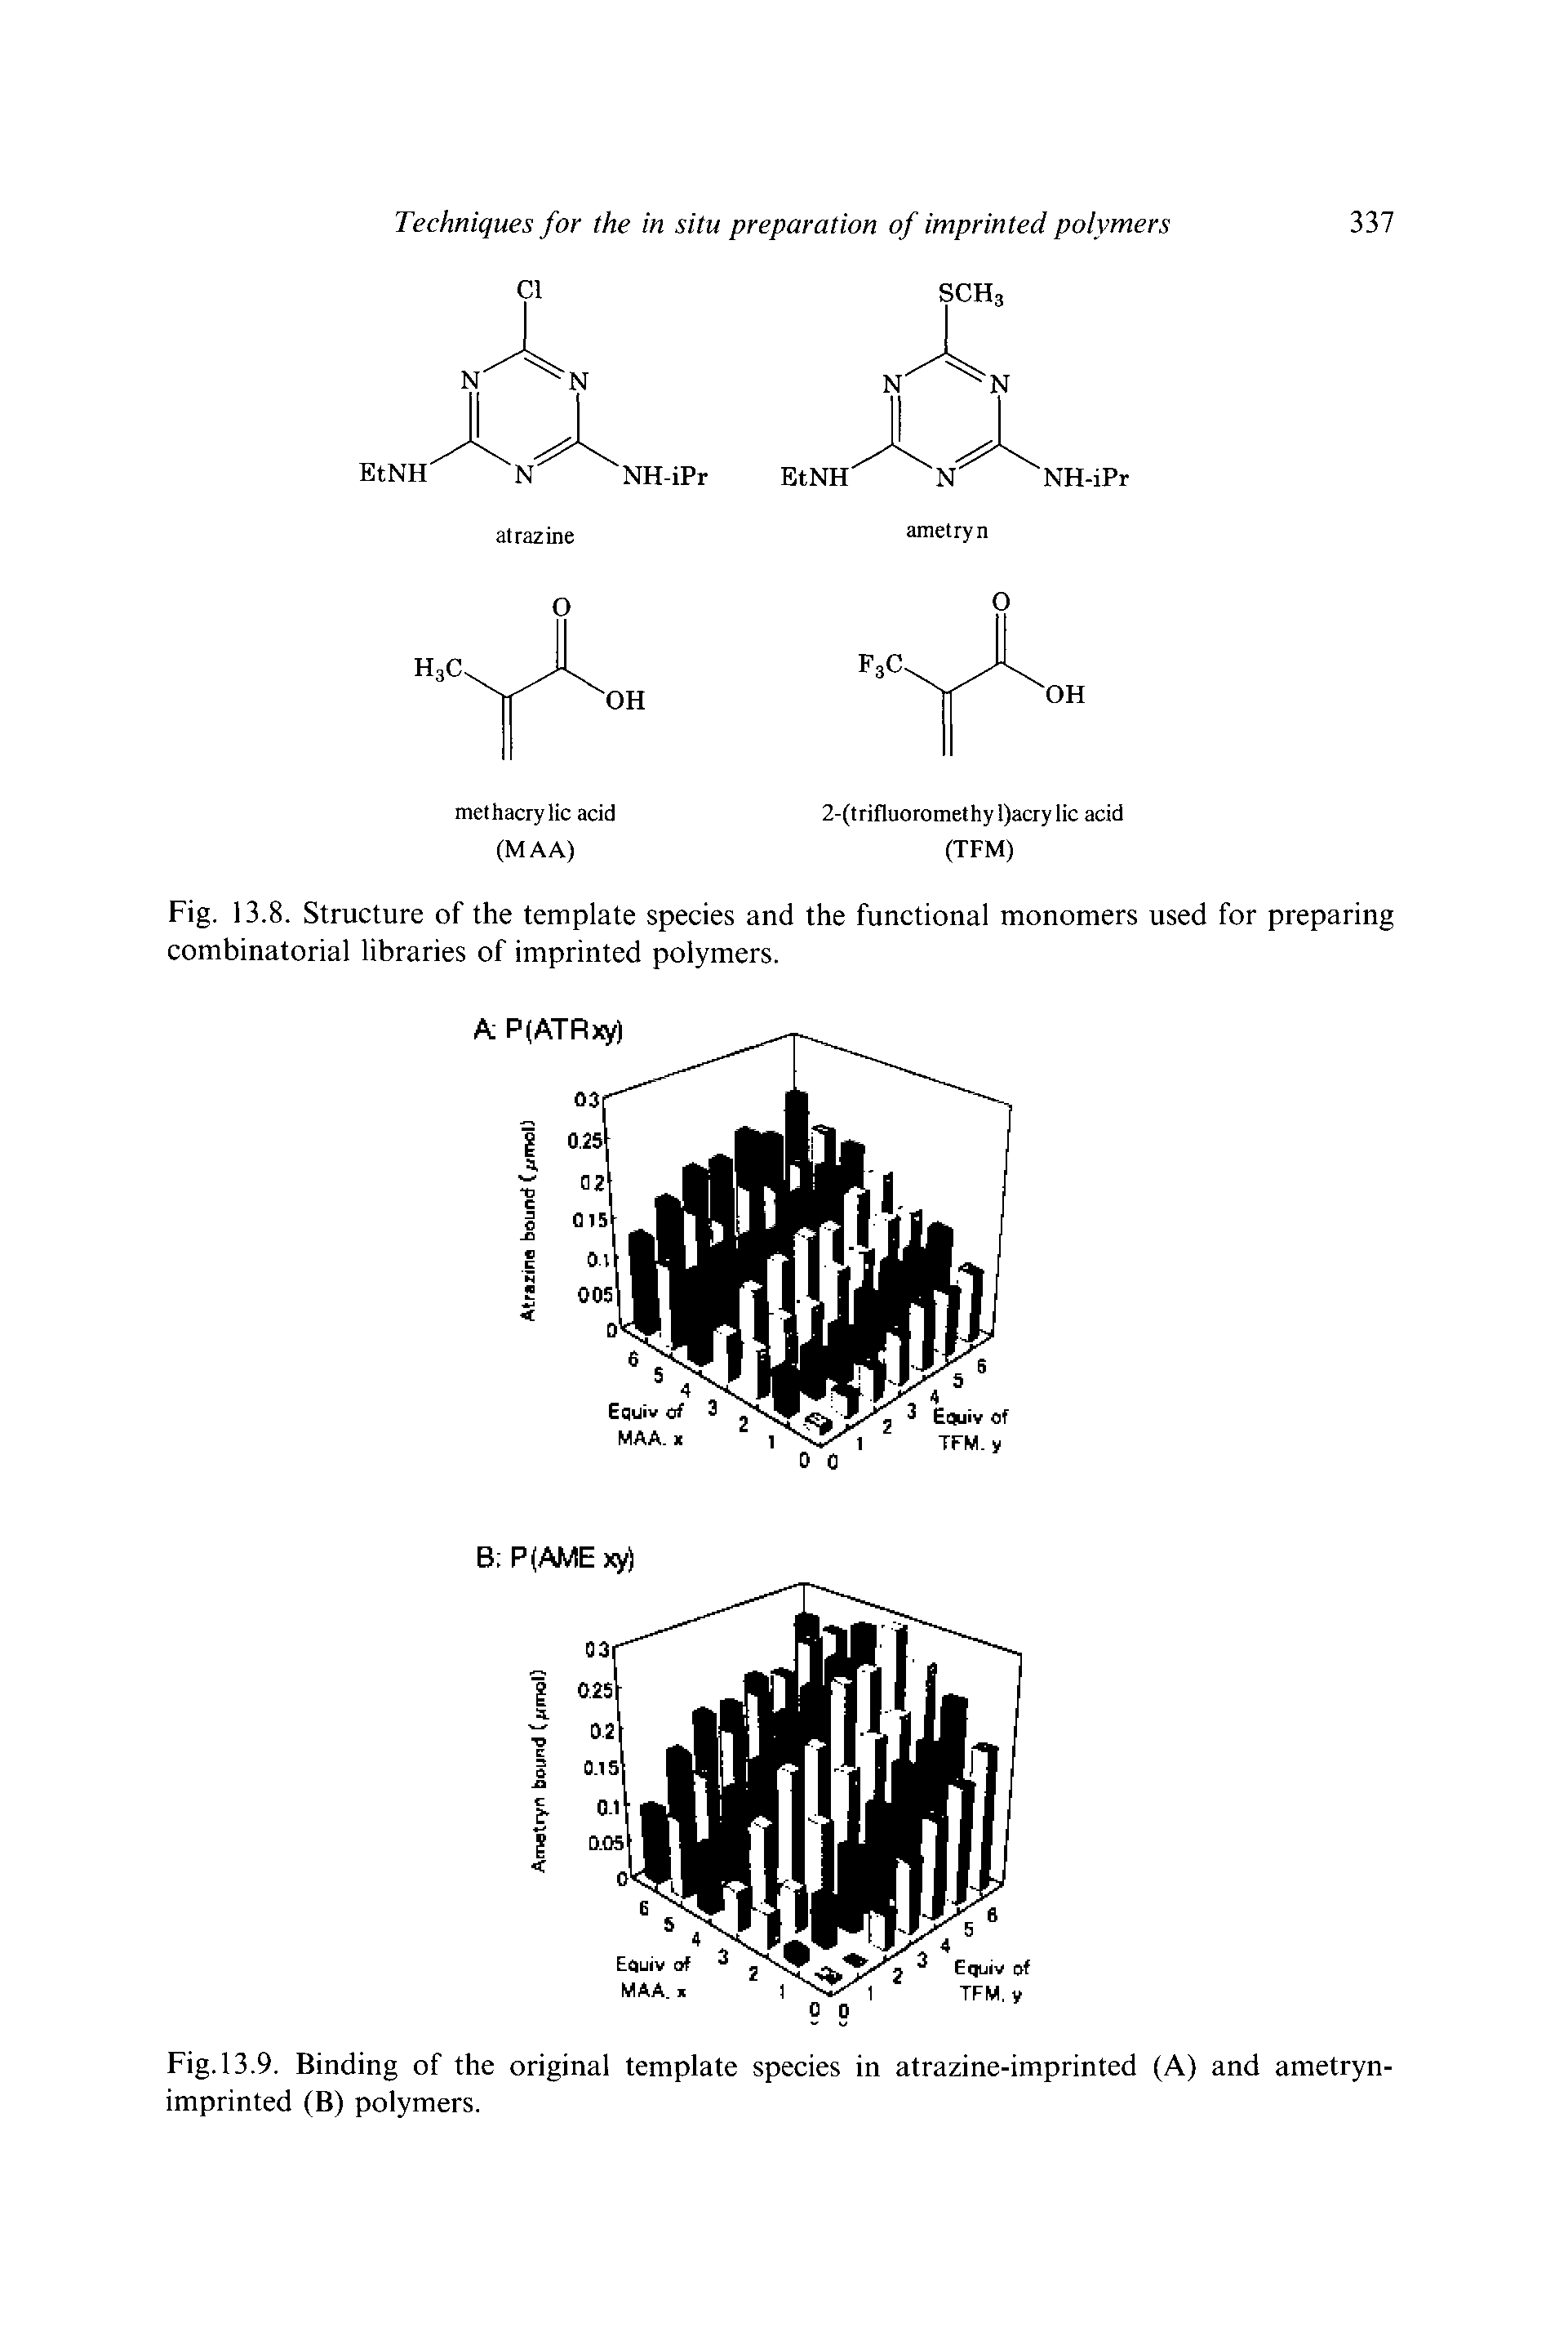 Fig. 13.9. Binding of the original template species in atrazine-imprinted (A) and ametryn-imprinted (B) polymers.